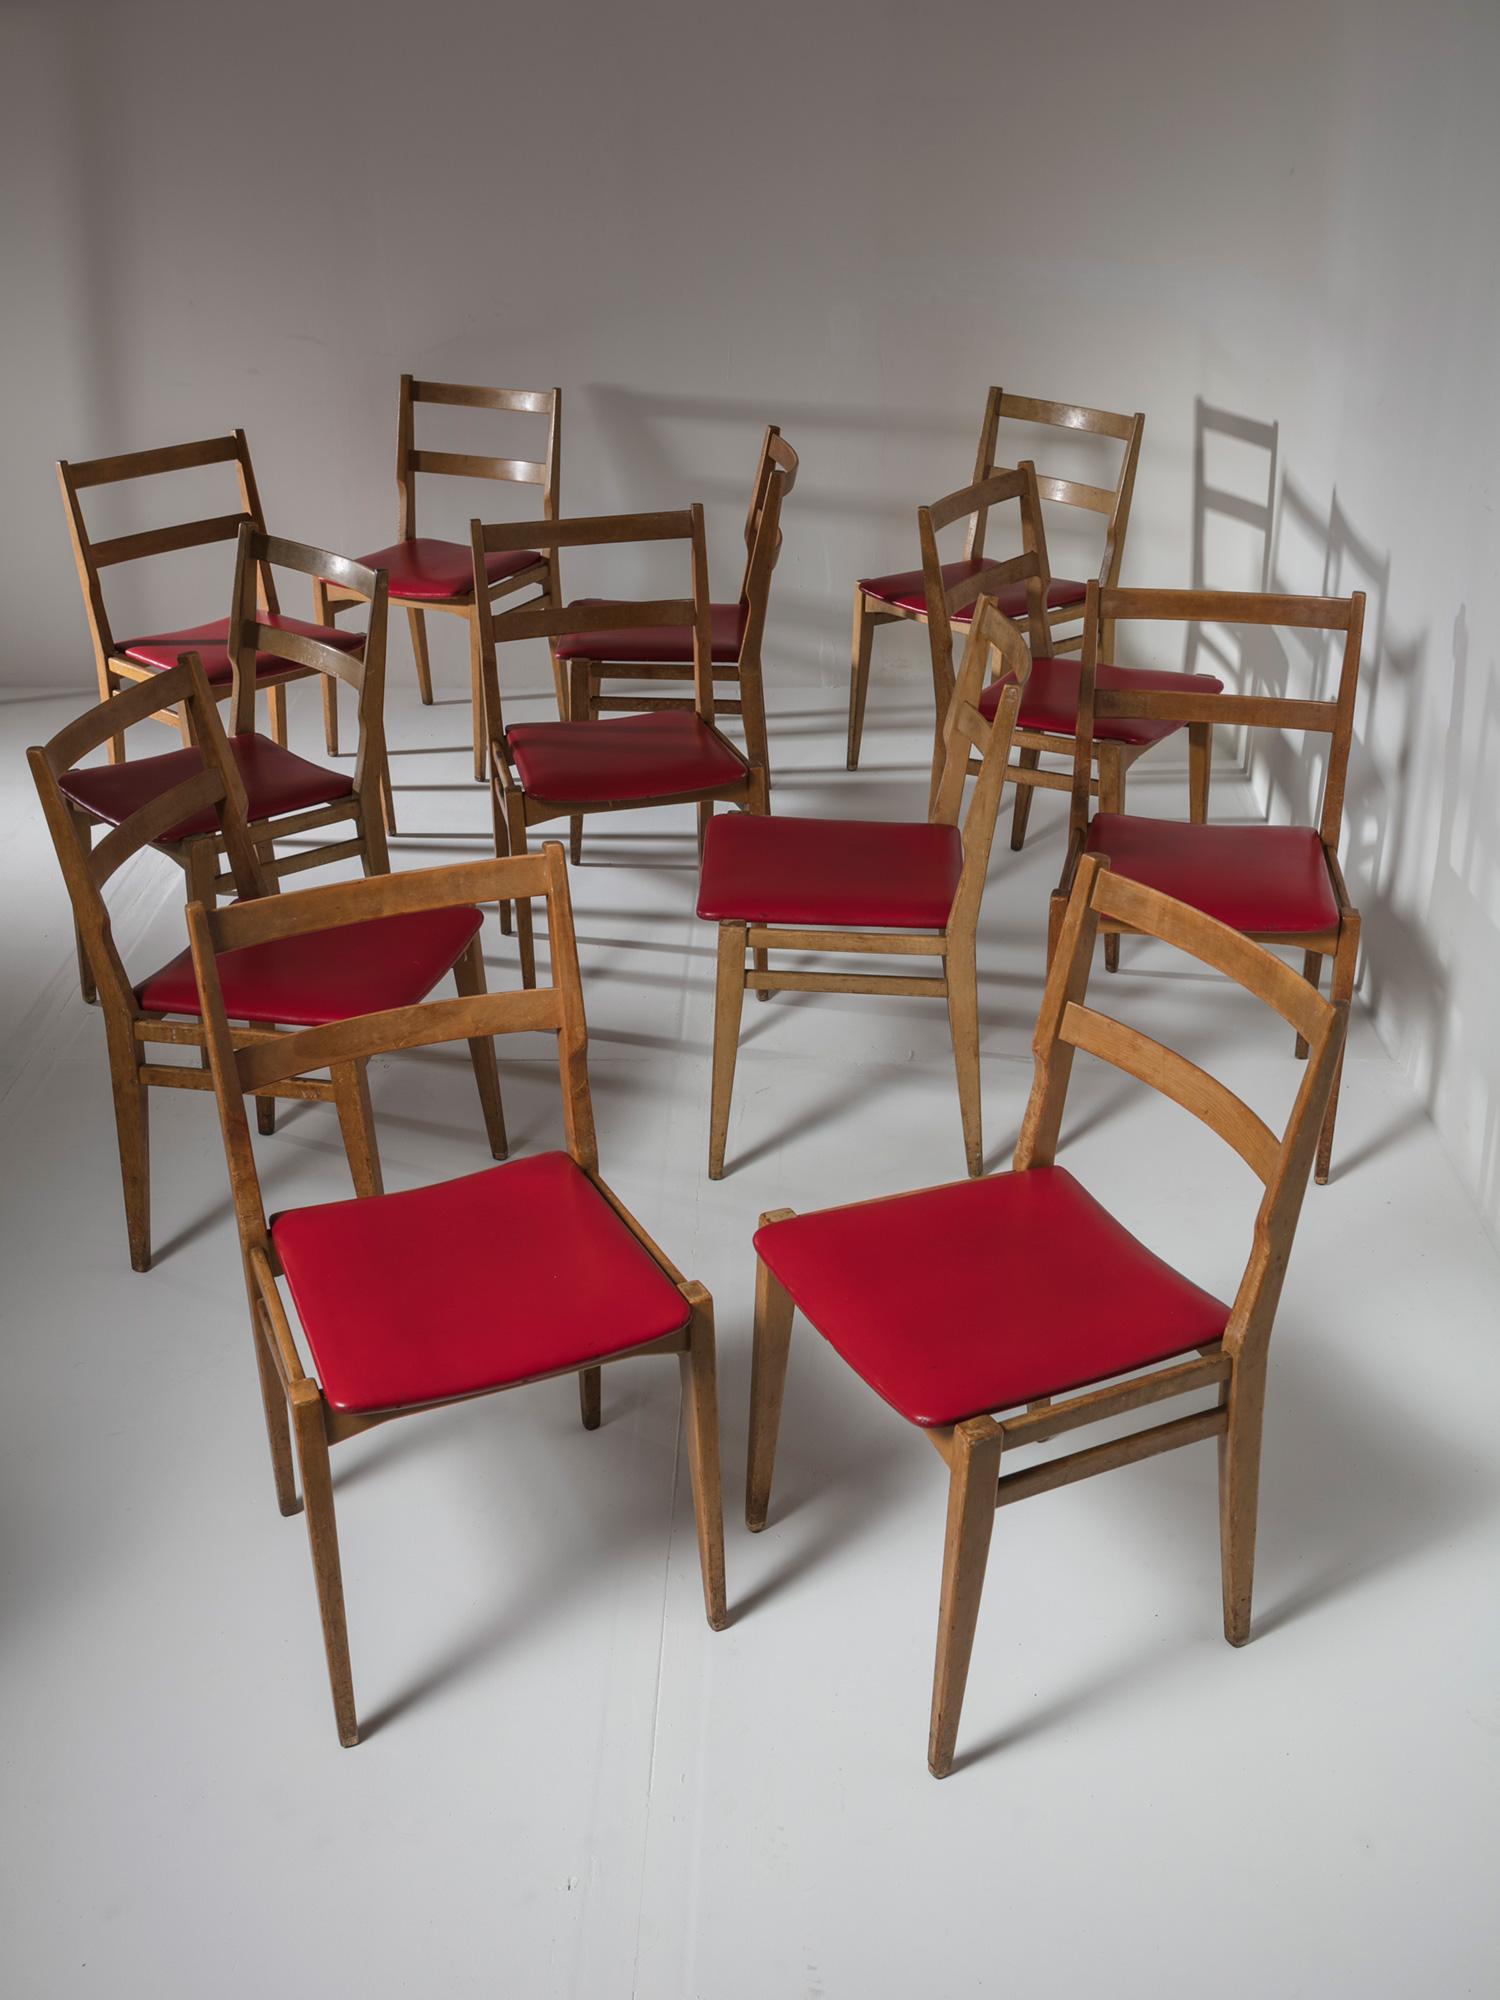 Set of twelve dining chairs by Melchiorre Bega for Cassina.
Comfortable and compact chairs with artificial leather seats.